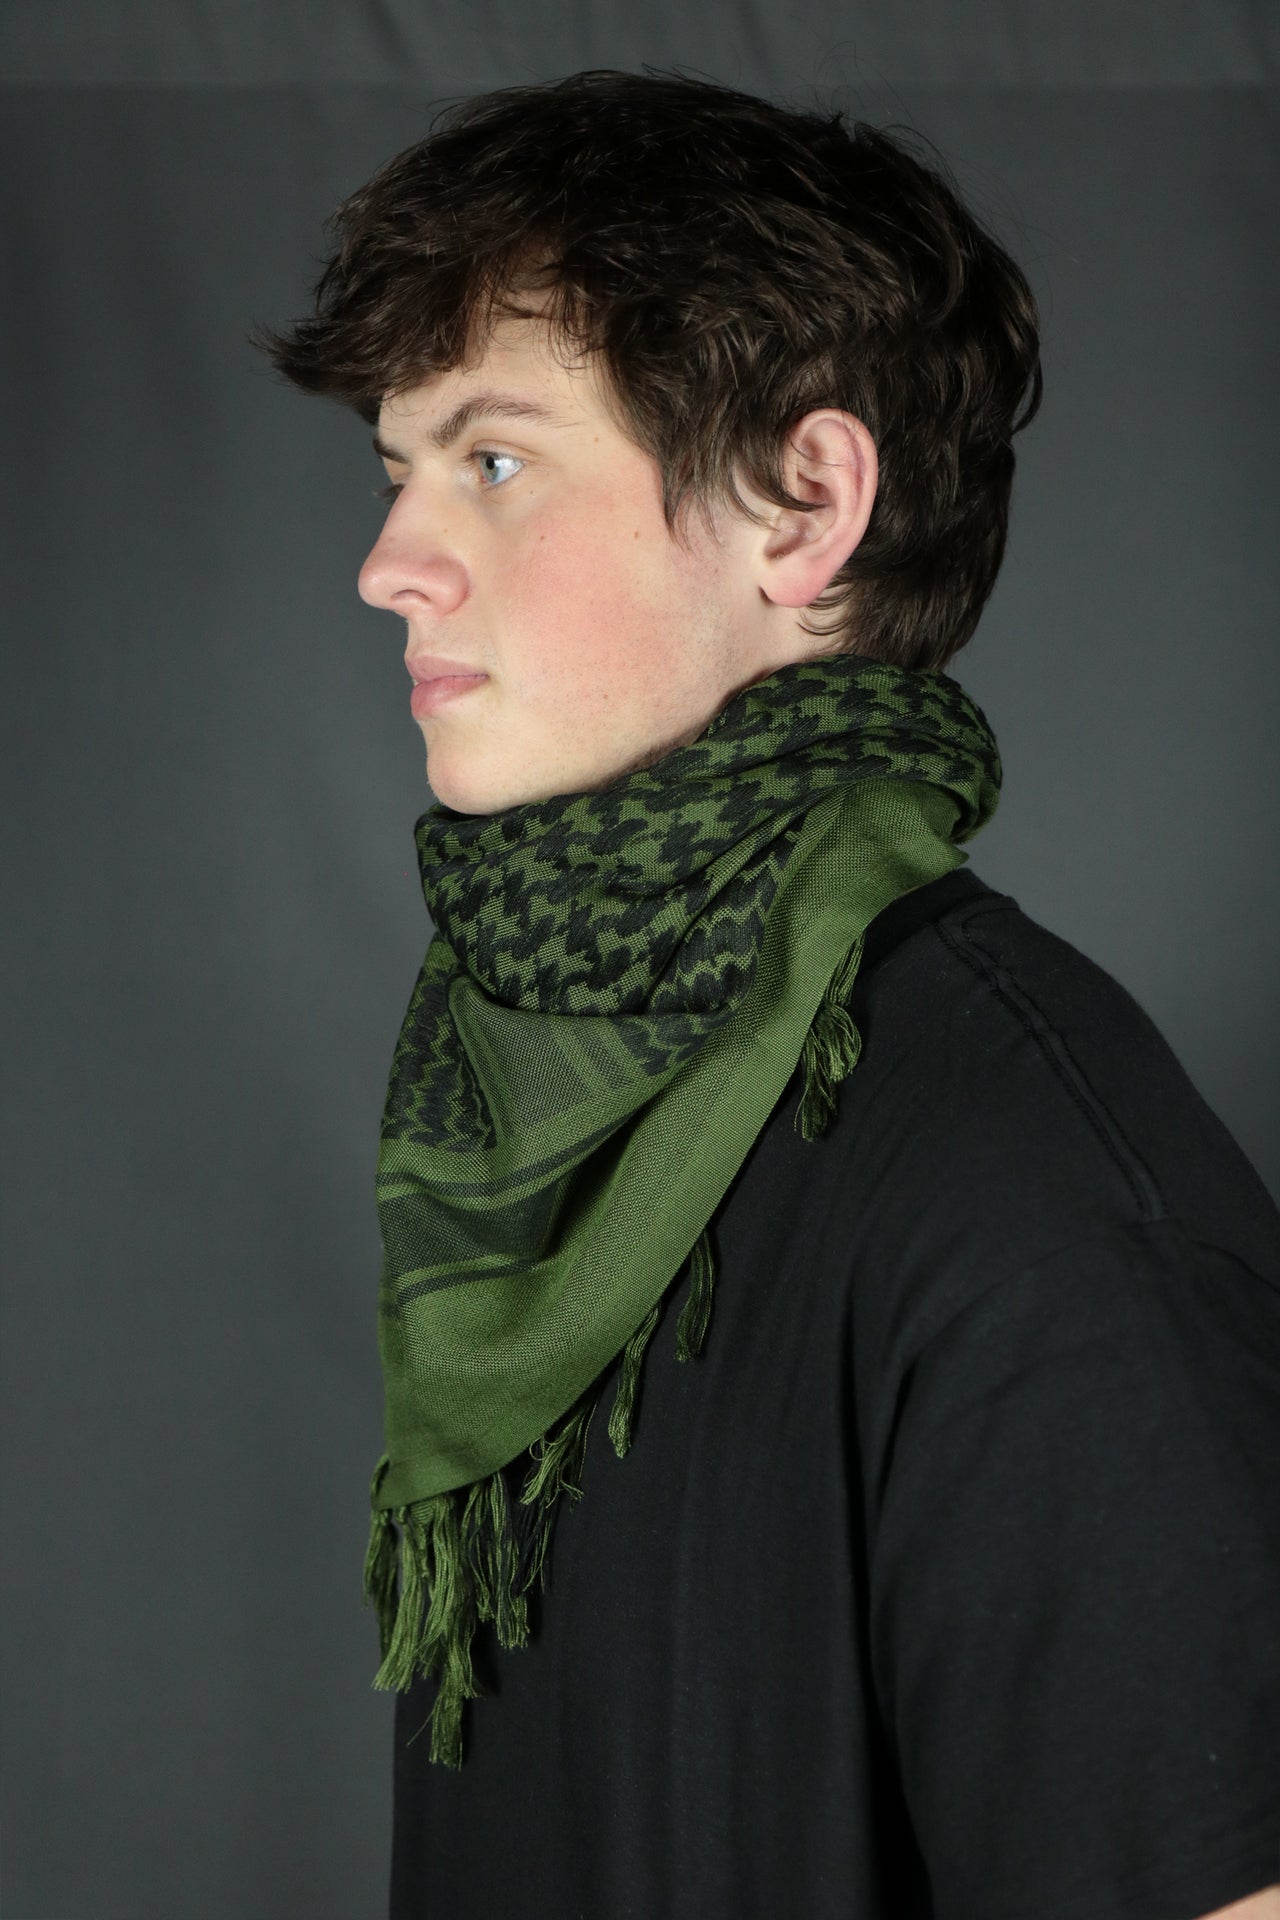 Arabic Sheik Print Shemagh Scarf | Black and Olive Face Scarf